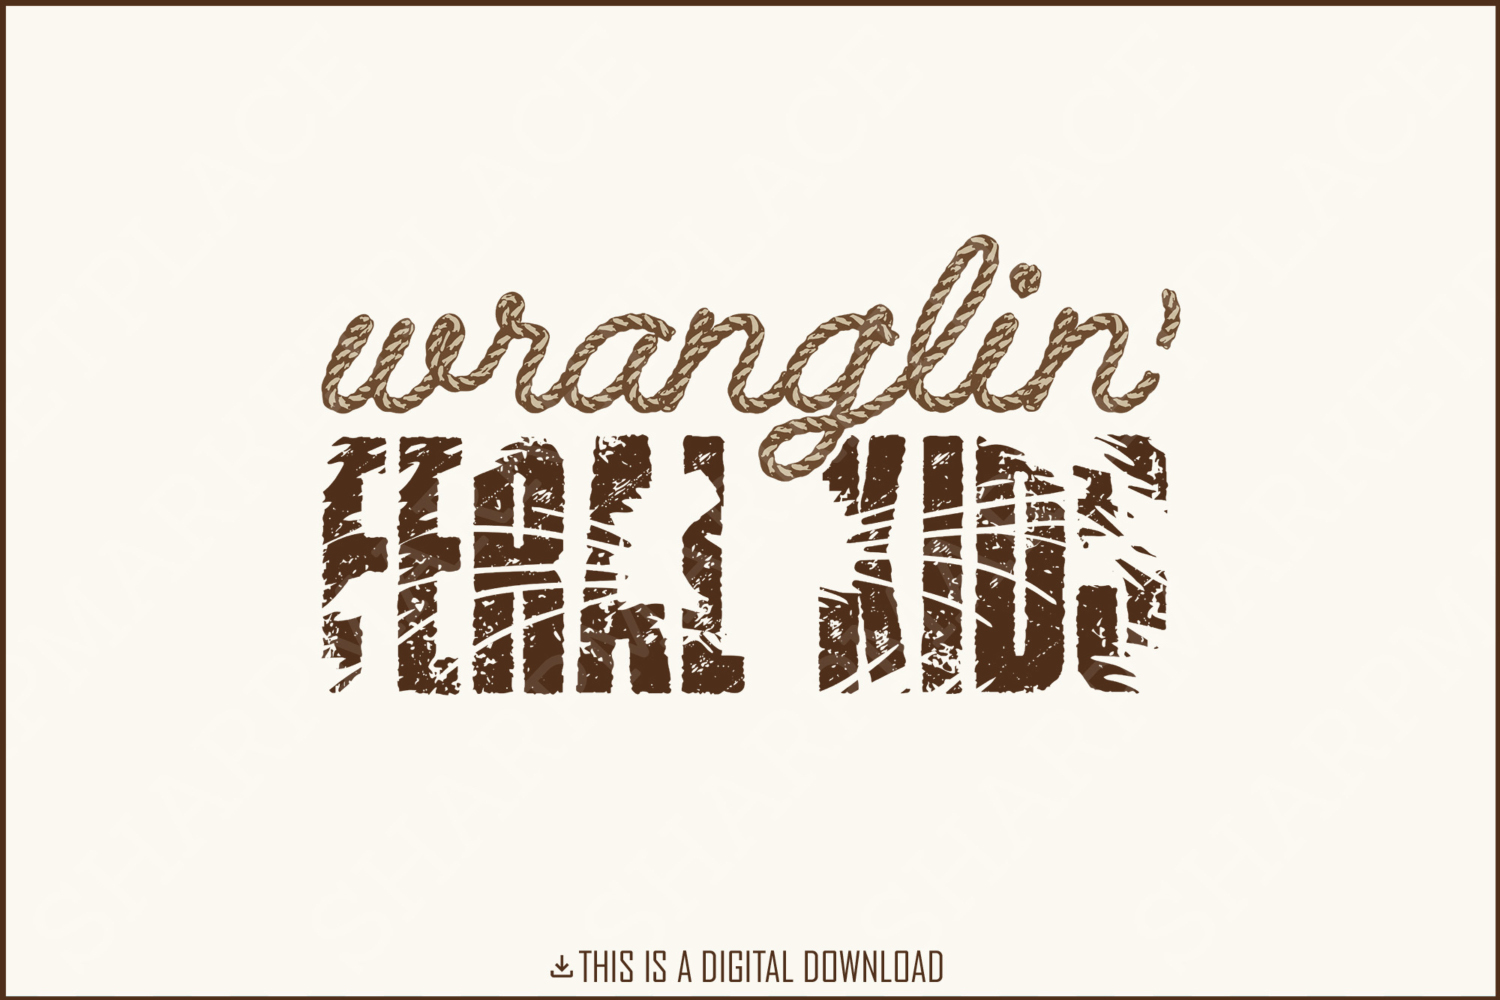 Wrangling Feral Kids PNG, Funny Raccoon Kids PNG, Feral Kids Shirt, Digital Download, Raccoon Shirt